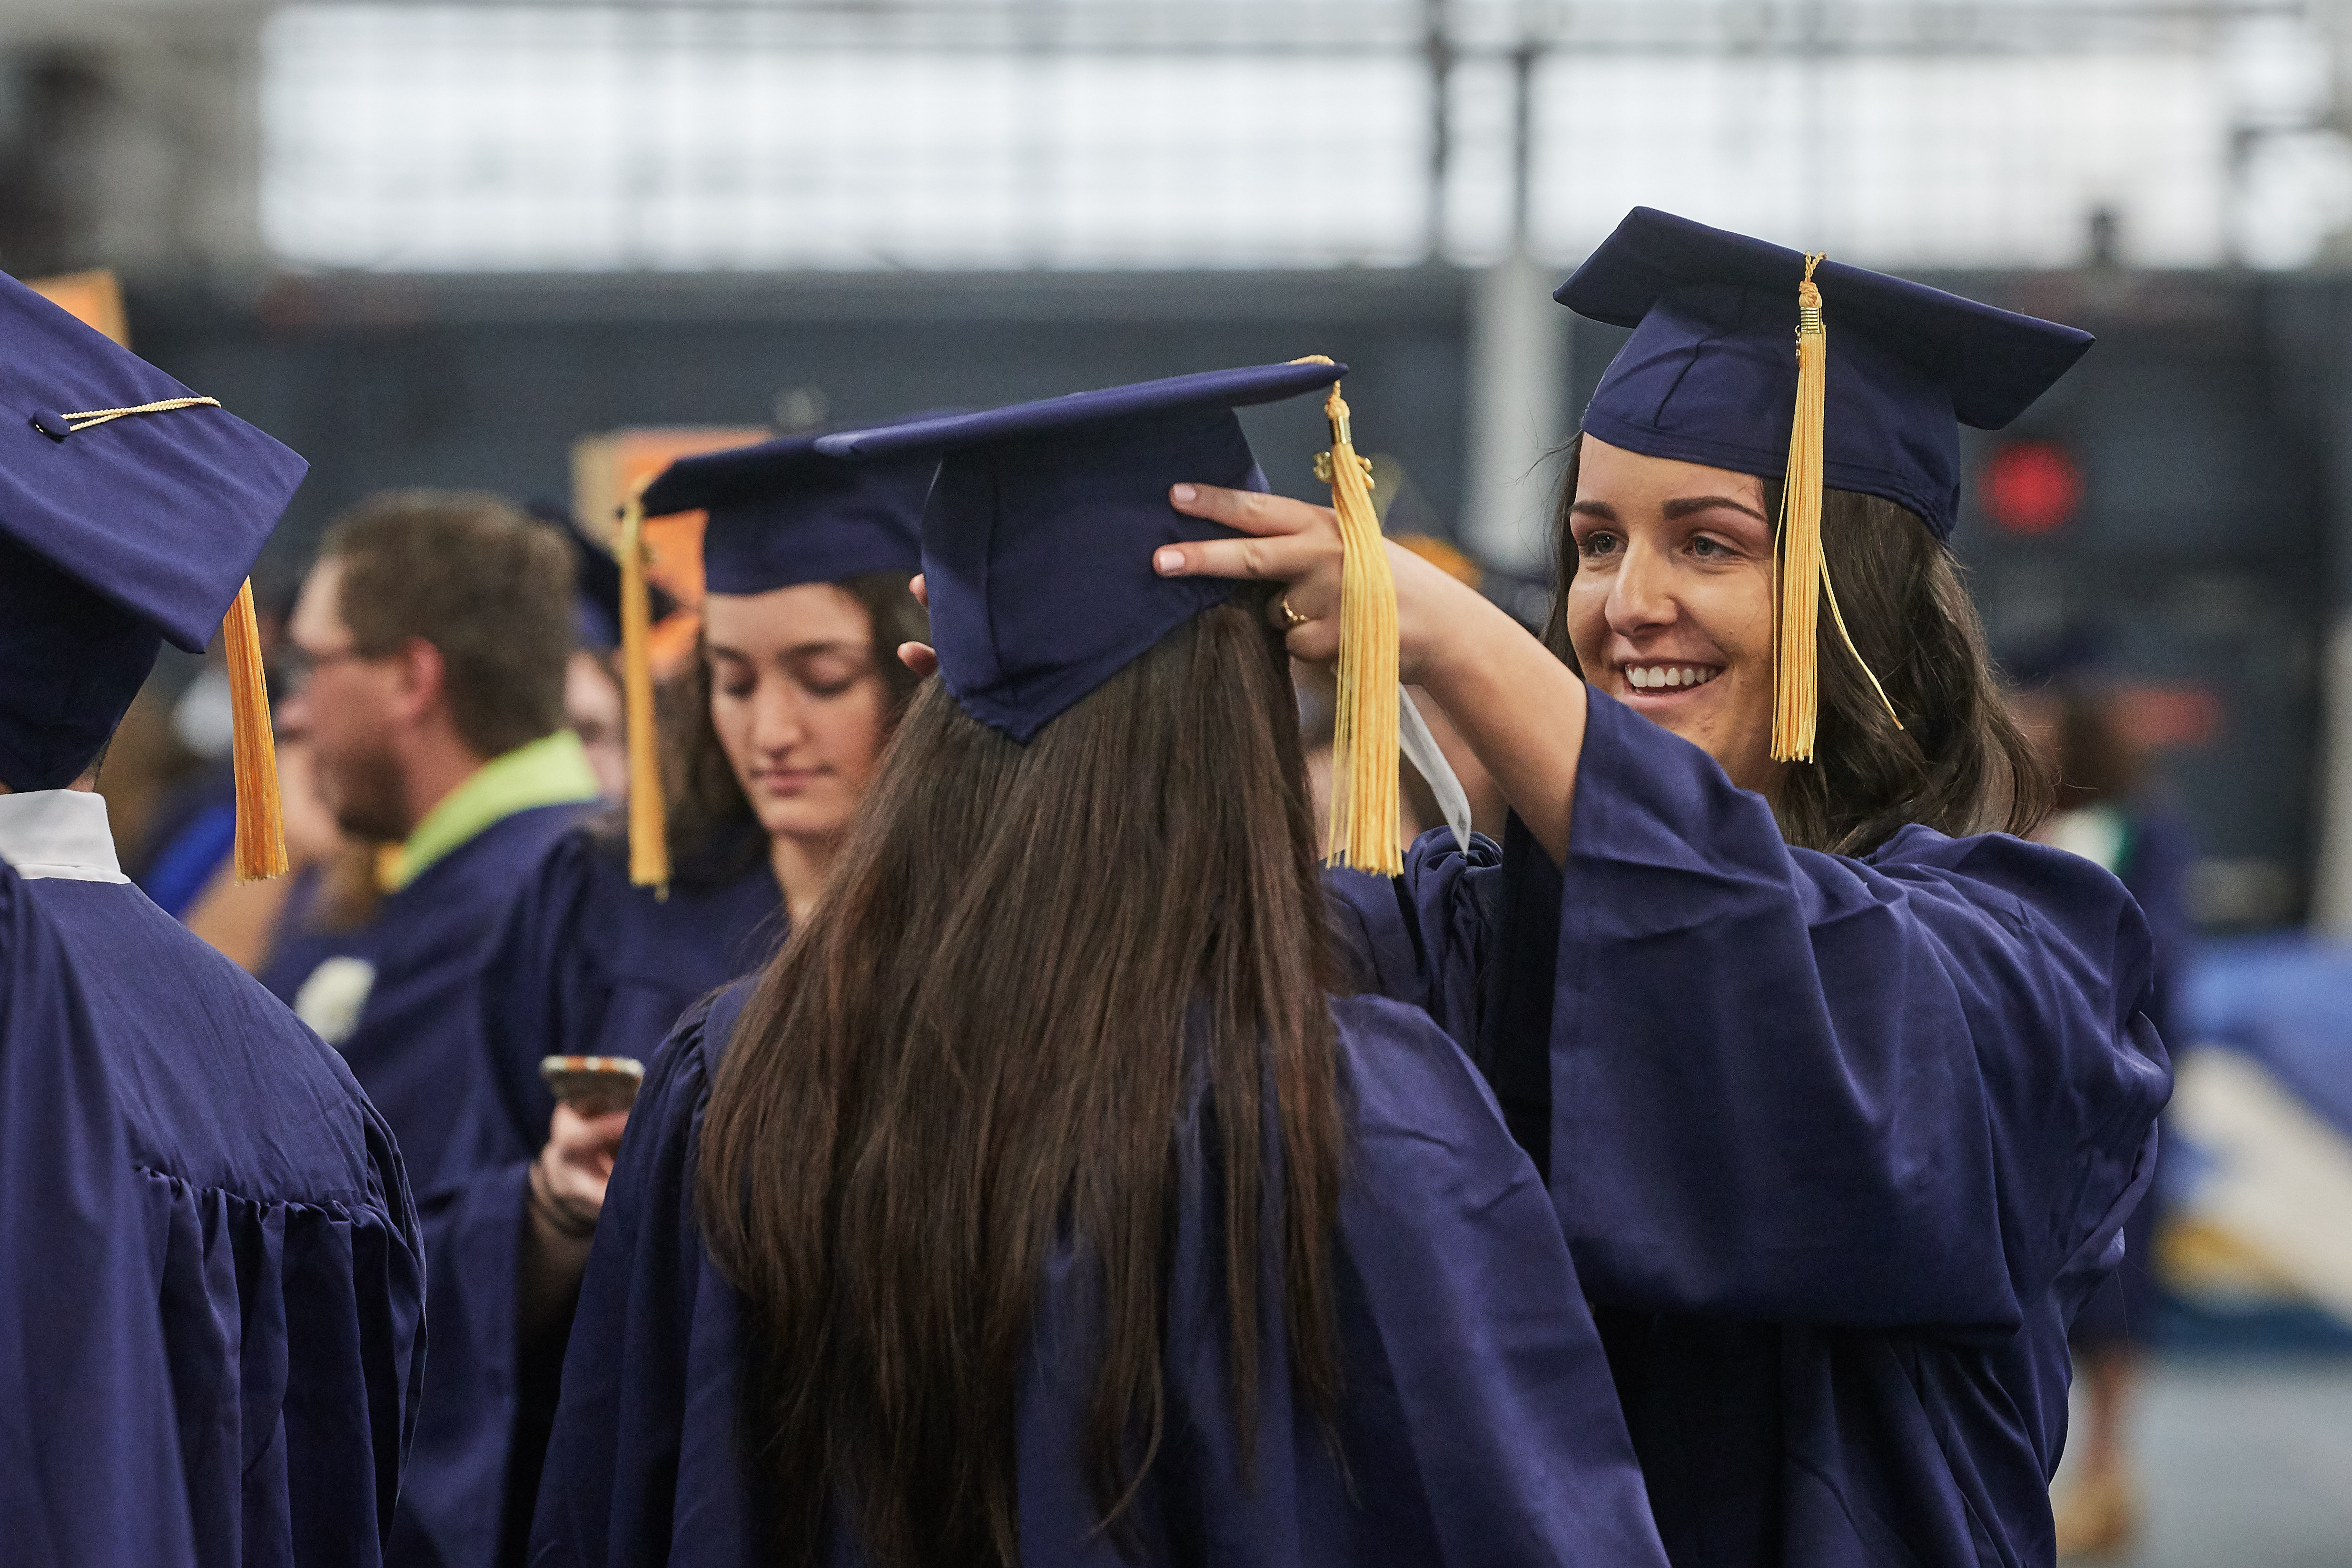 Bridgette Collier '18 (CAHNR), right, helps Mariah Lombard '18 (CAHNR) with her cap at Greer Field House before the College of Agriculture, Health, and Natural Resources Commencement procession on May 5, 2018. (Peter Morenus/UConn Photo)